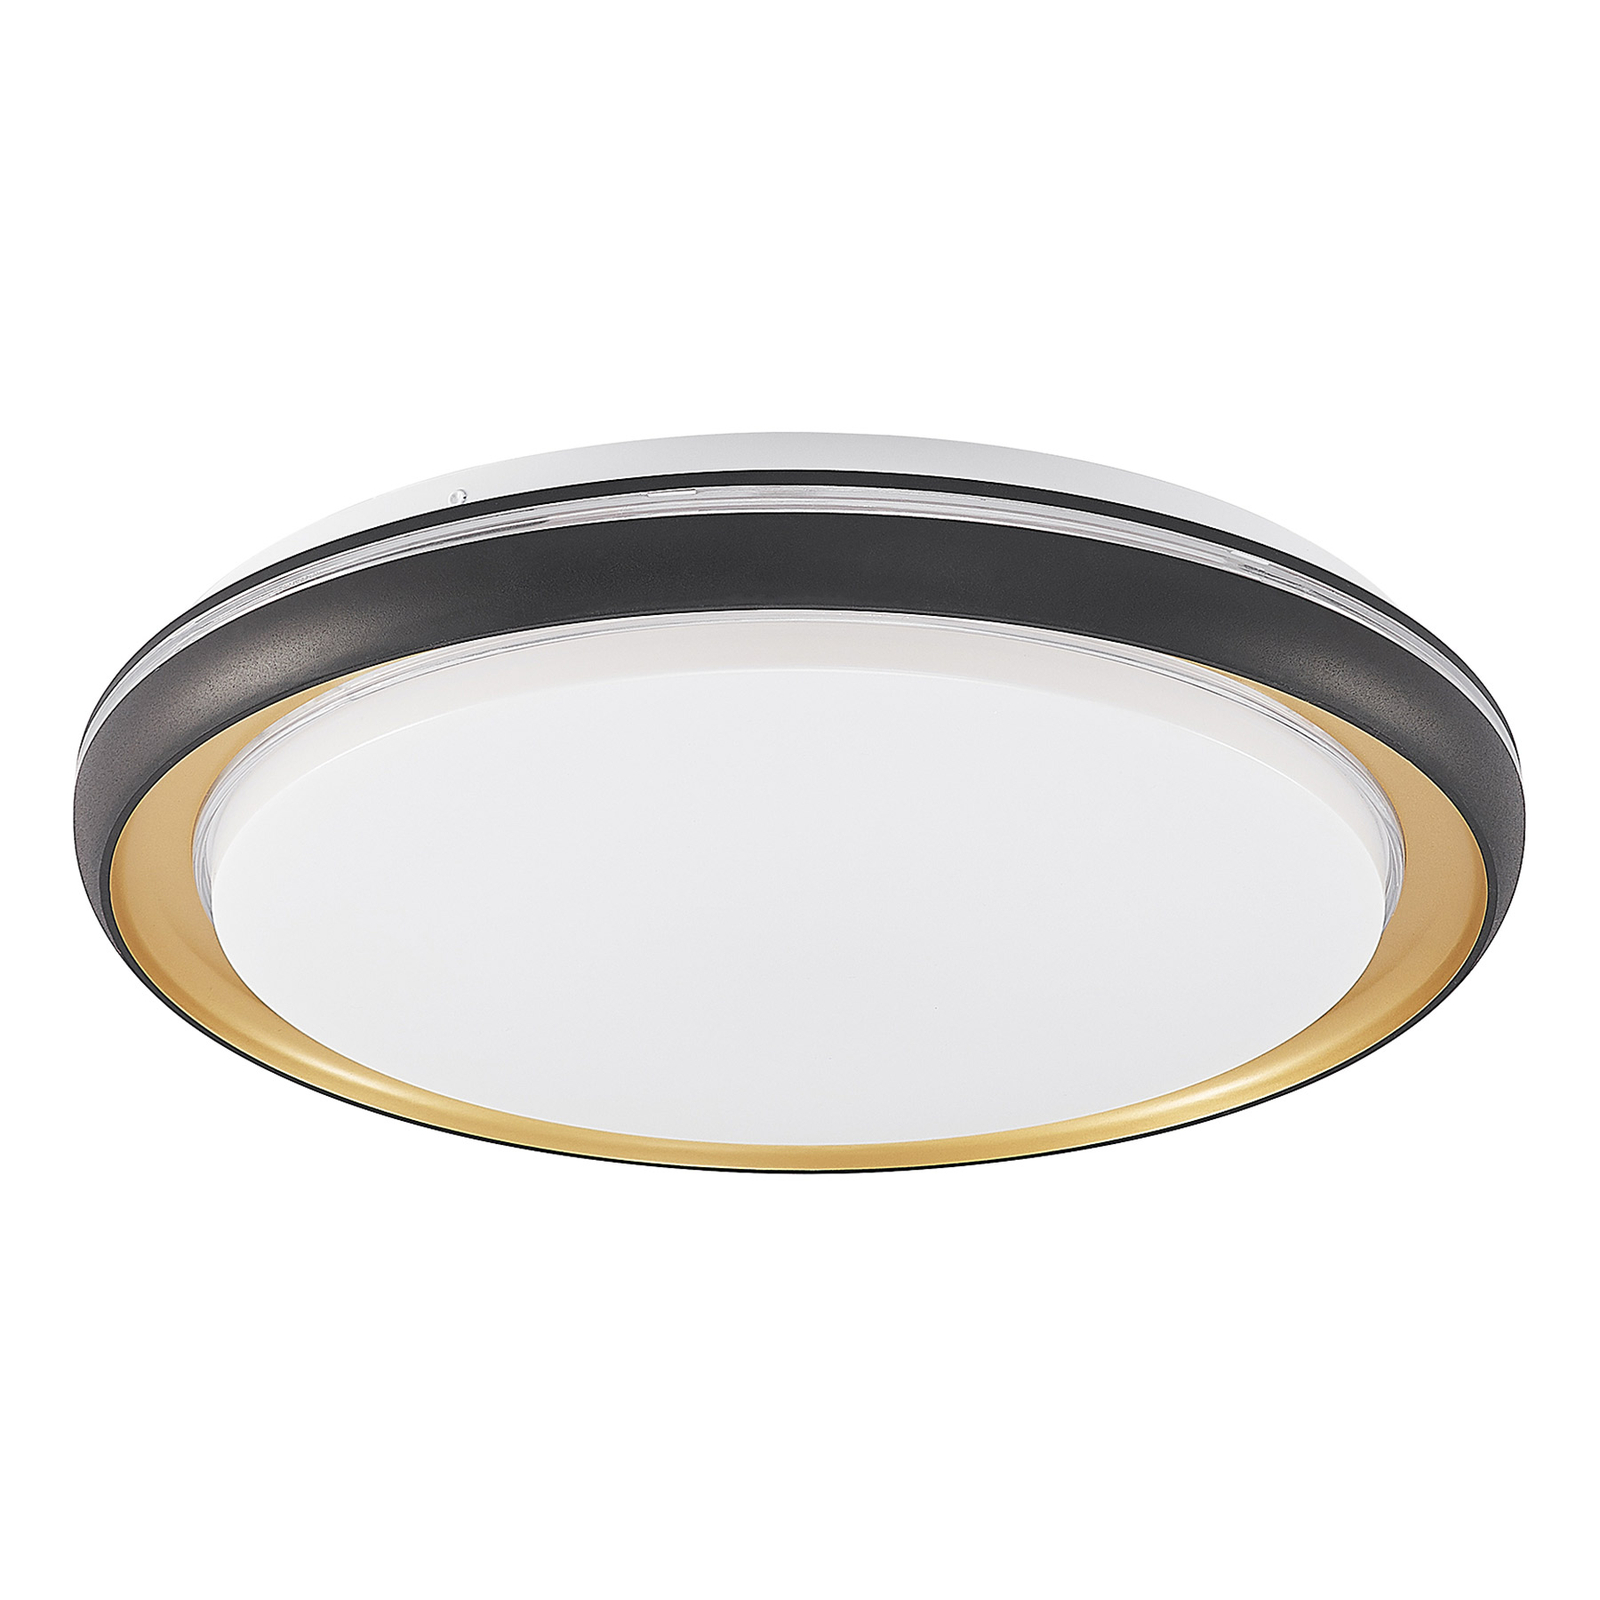 Lindby Melchioris LED ceiling light, round